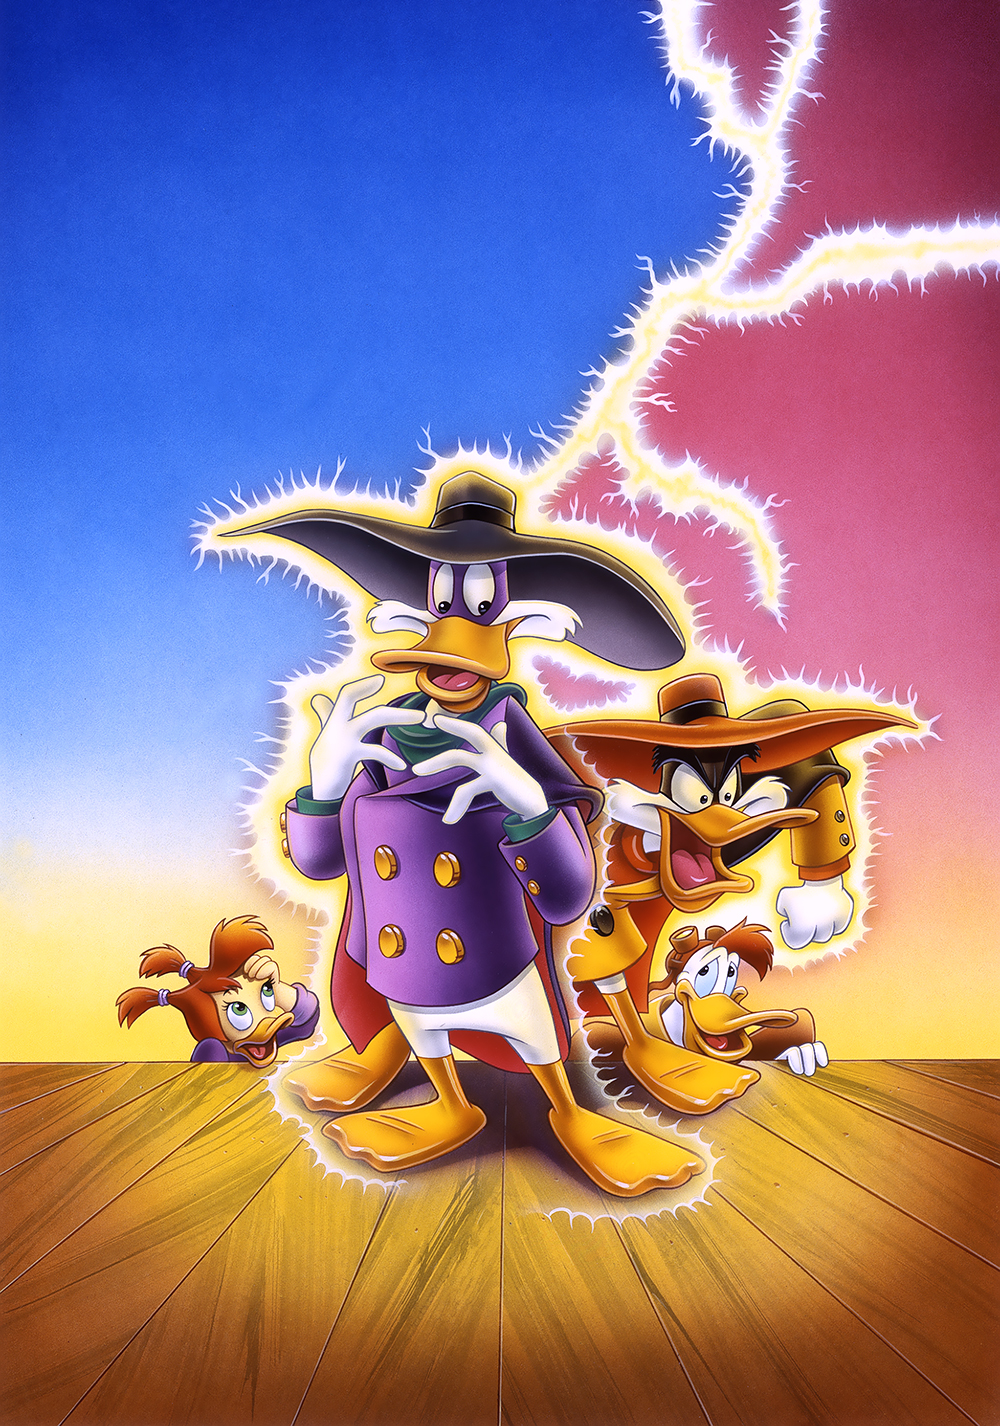 Darkwing Duck Tv Poster Image The Birth Of